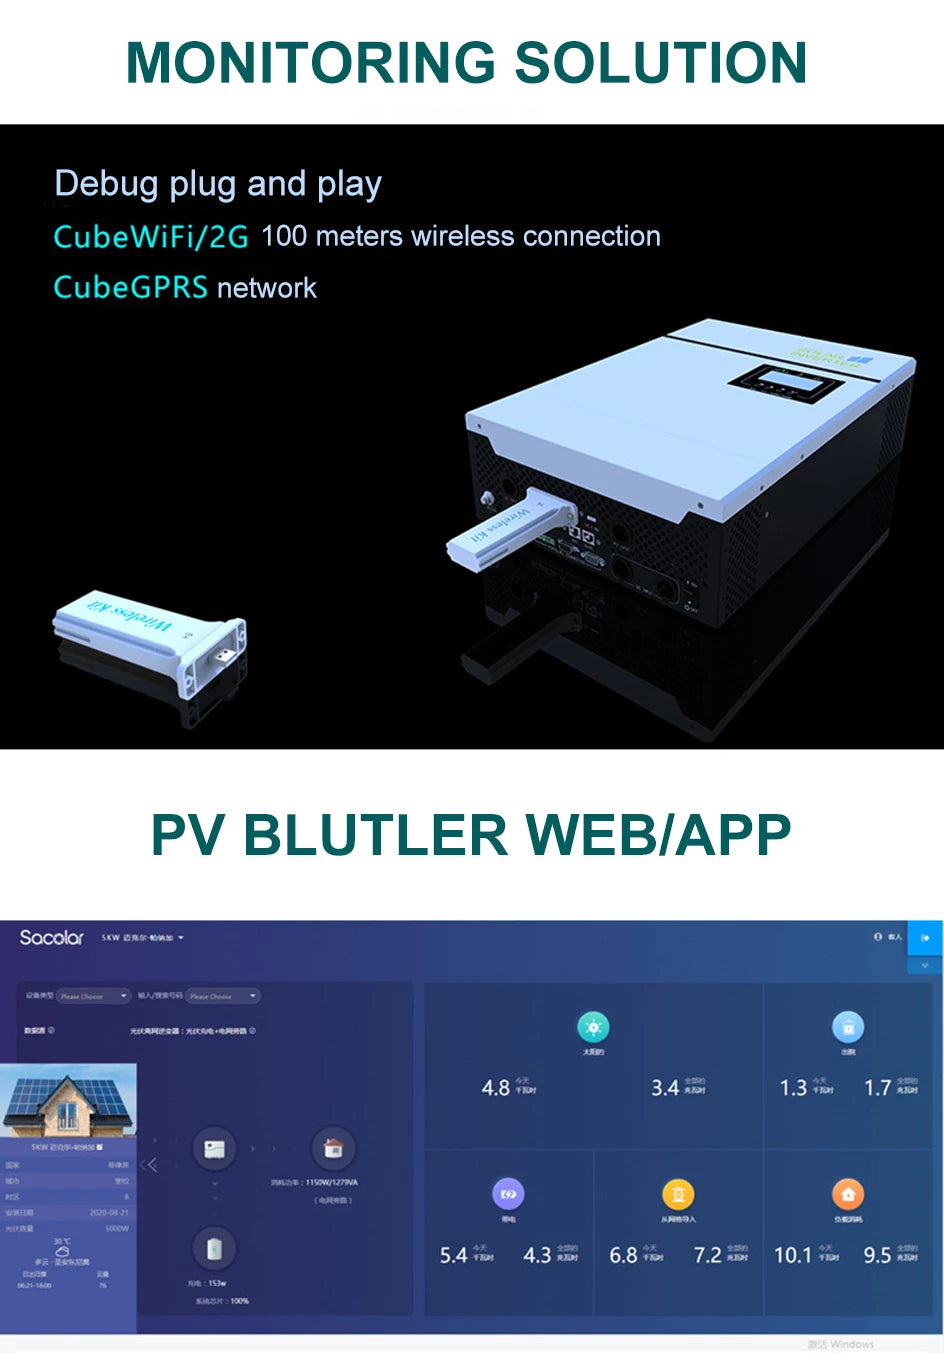 New 48V 5Kw 3.5Kw Inverter, Monitor and control your 48V battery system remotely with Wi-Fi/GPRS connectivity.